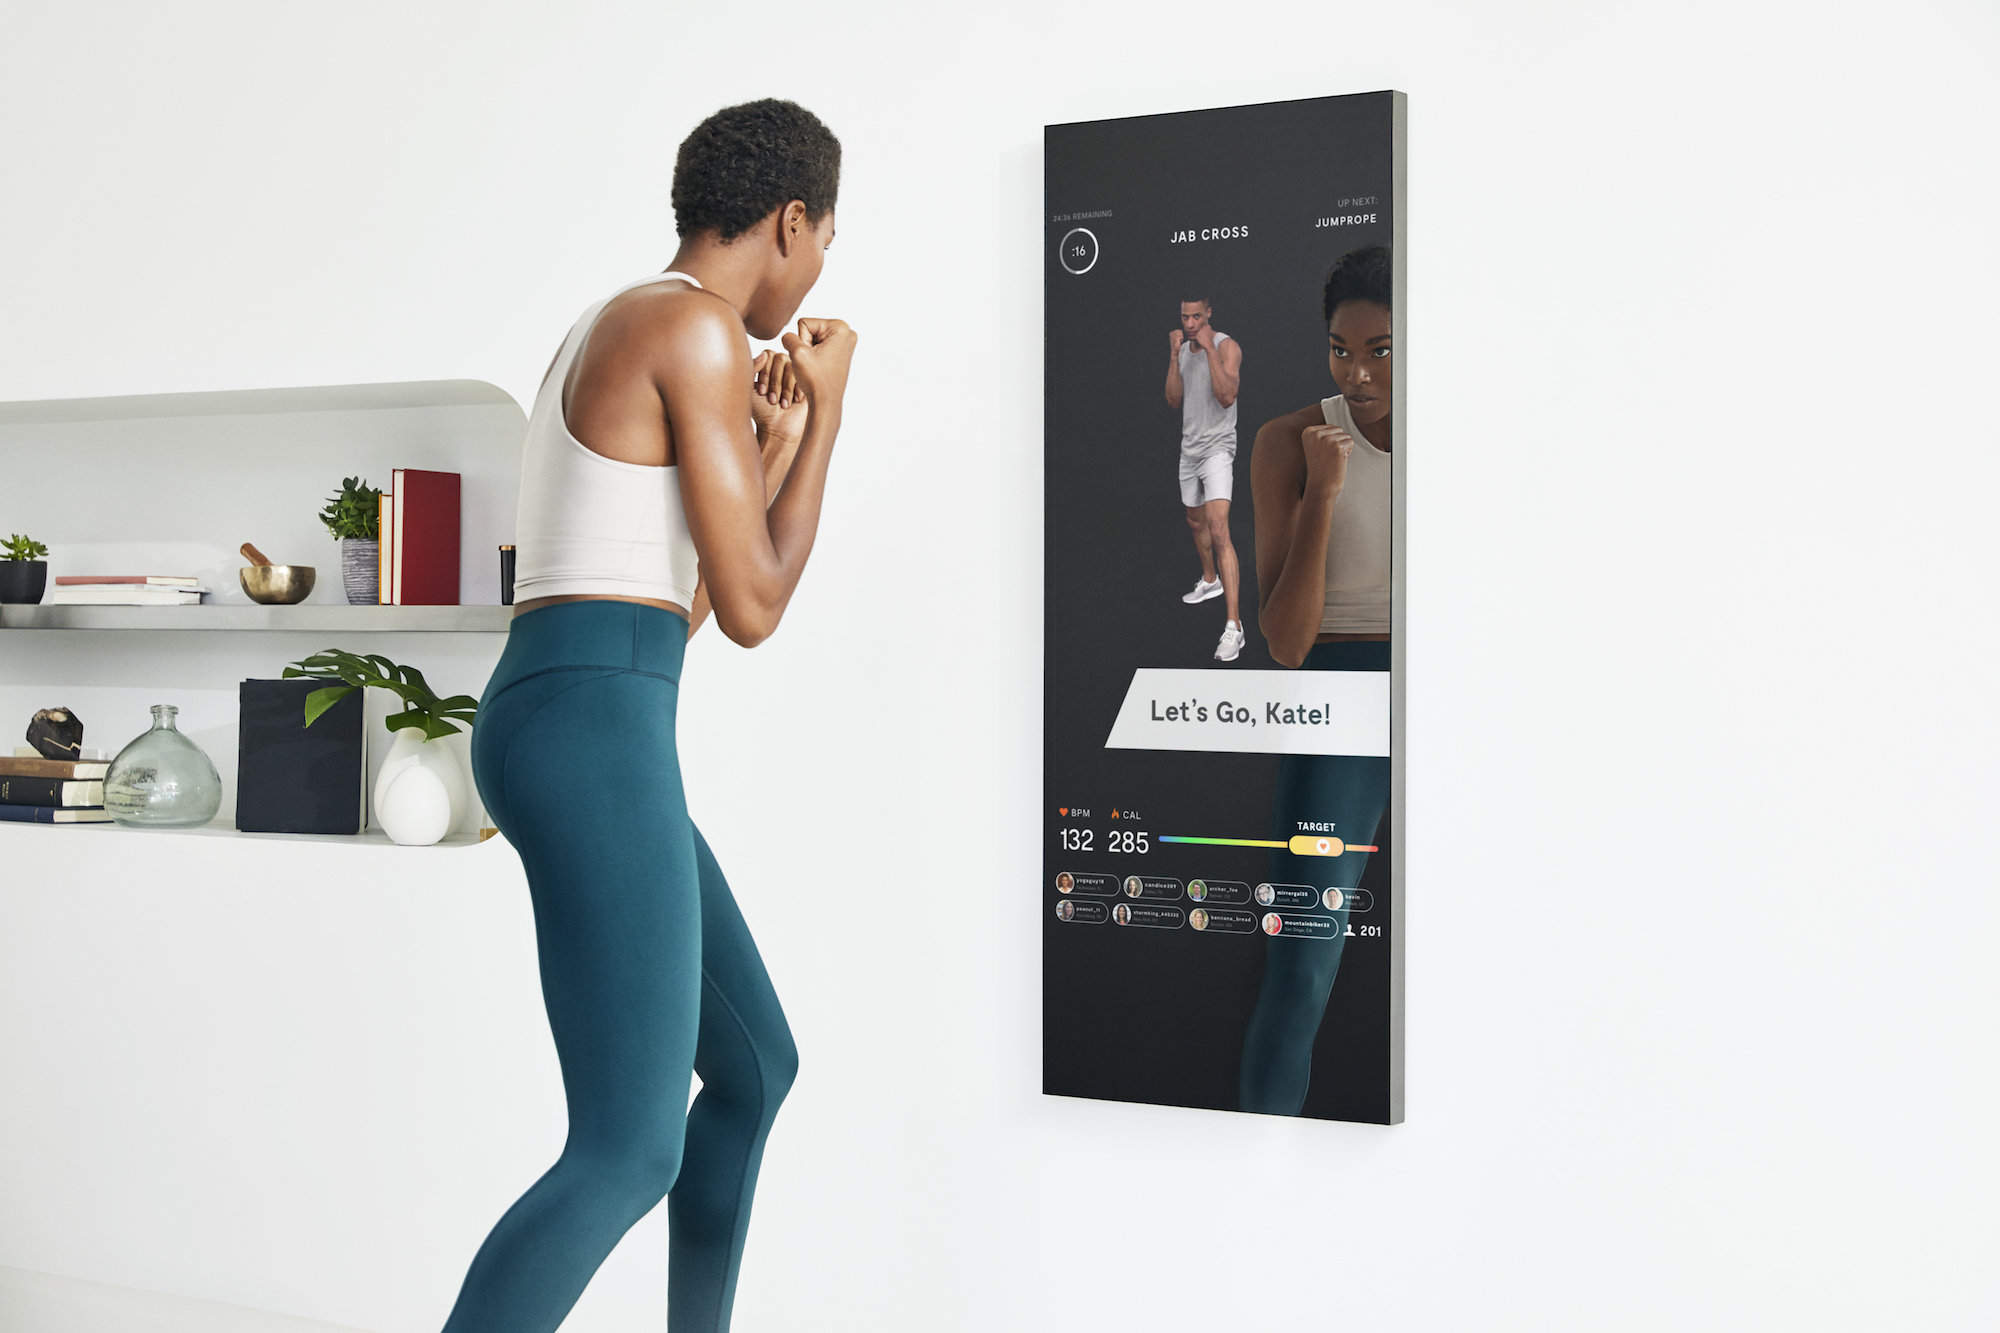 Get exercises with yoga training at home-Smart Mirror come soon